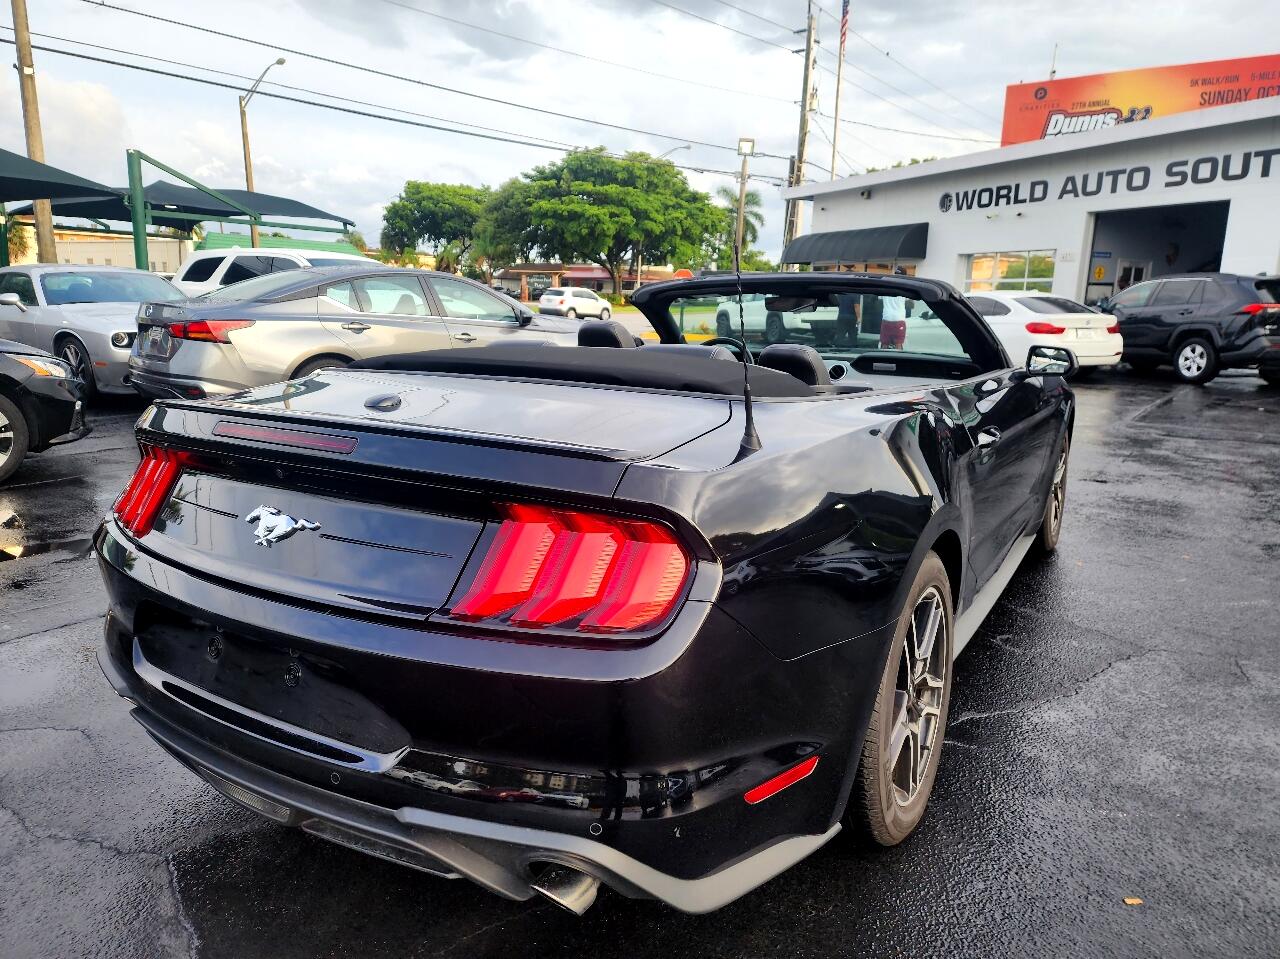 2022 FORD Mustang Convertible - $27,999